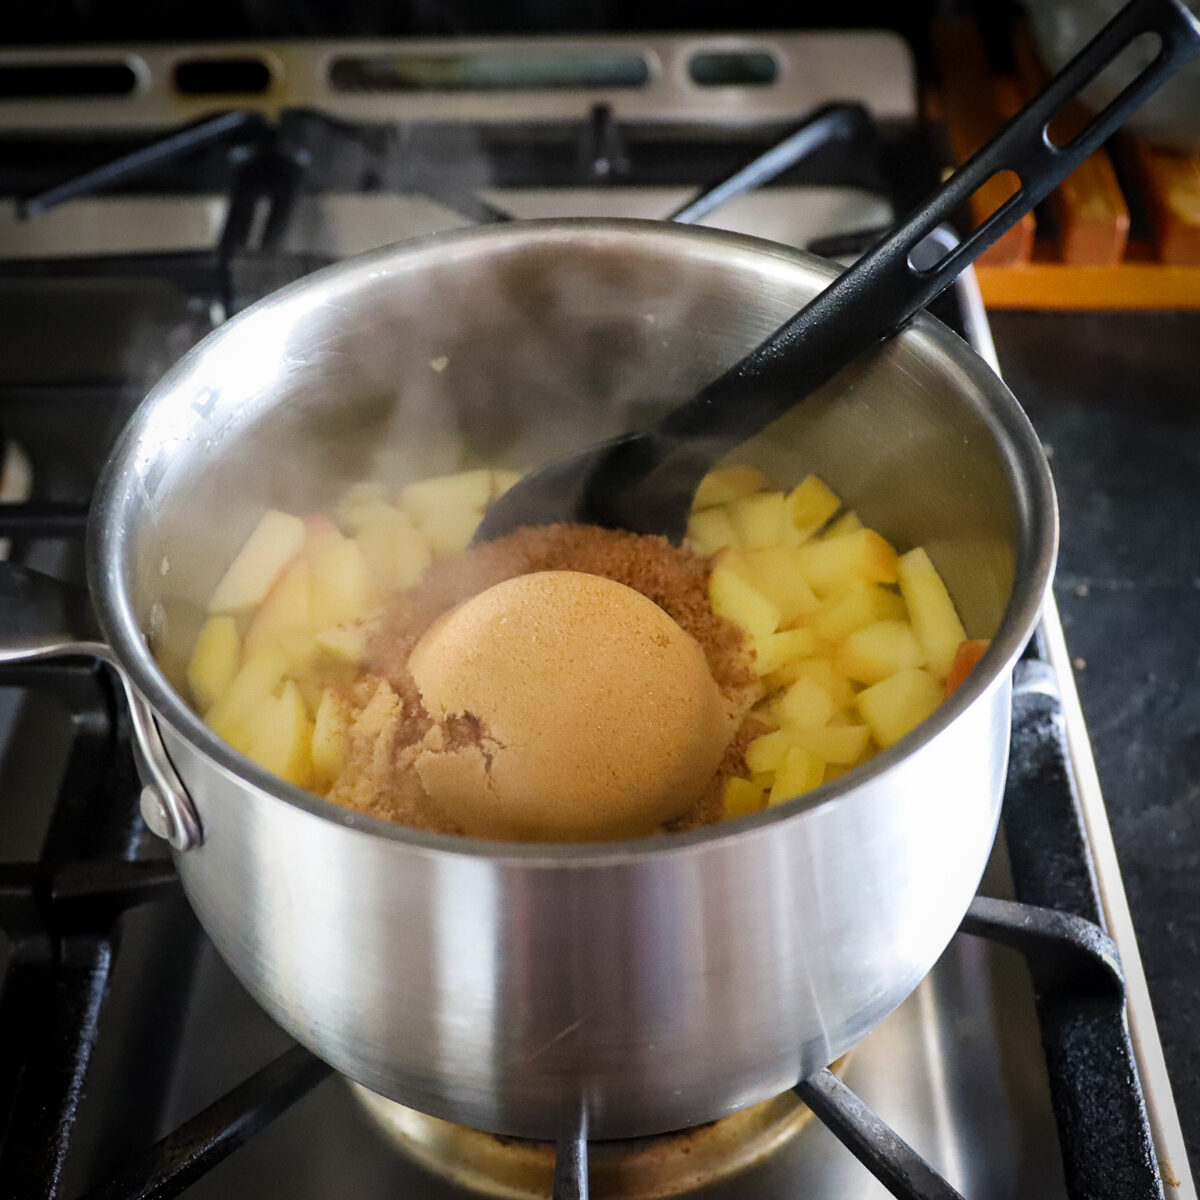 The cooking apples in the pot have the brown sugar added in a lump on top.